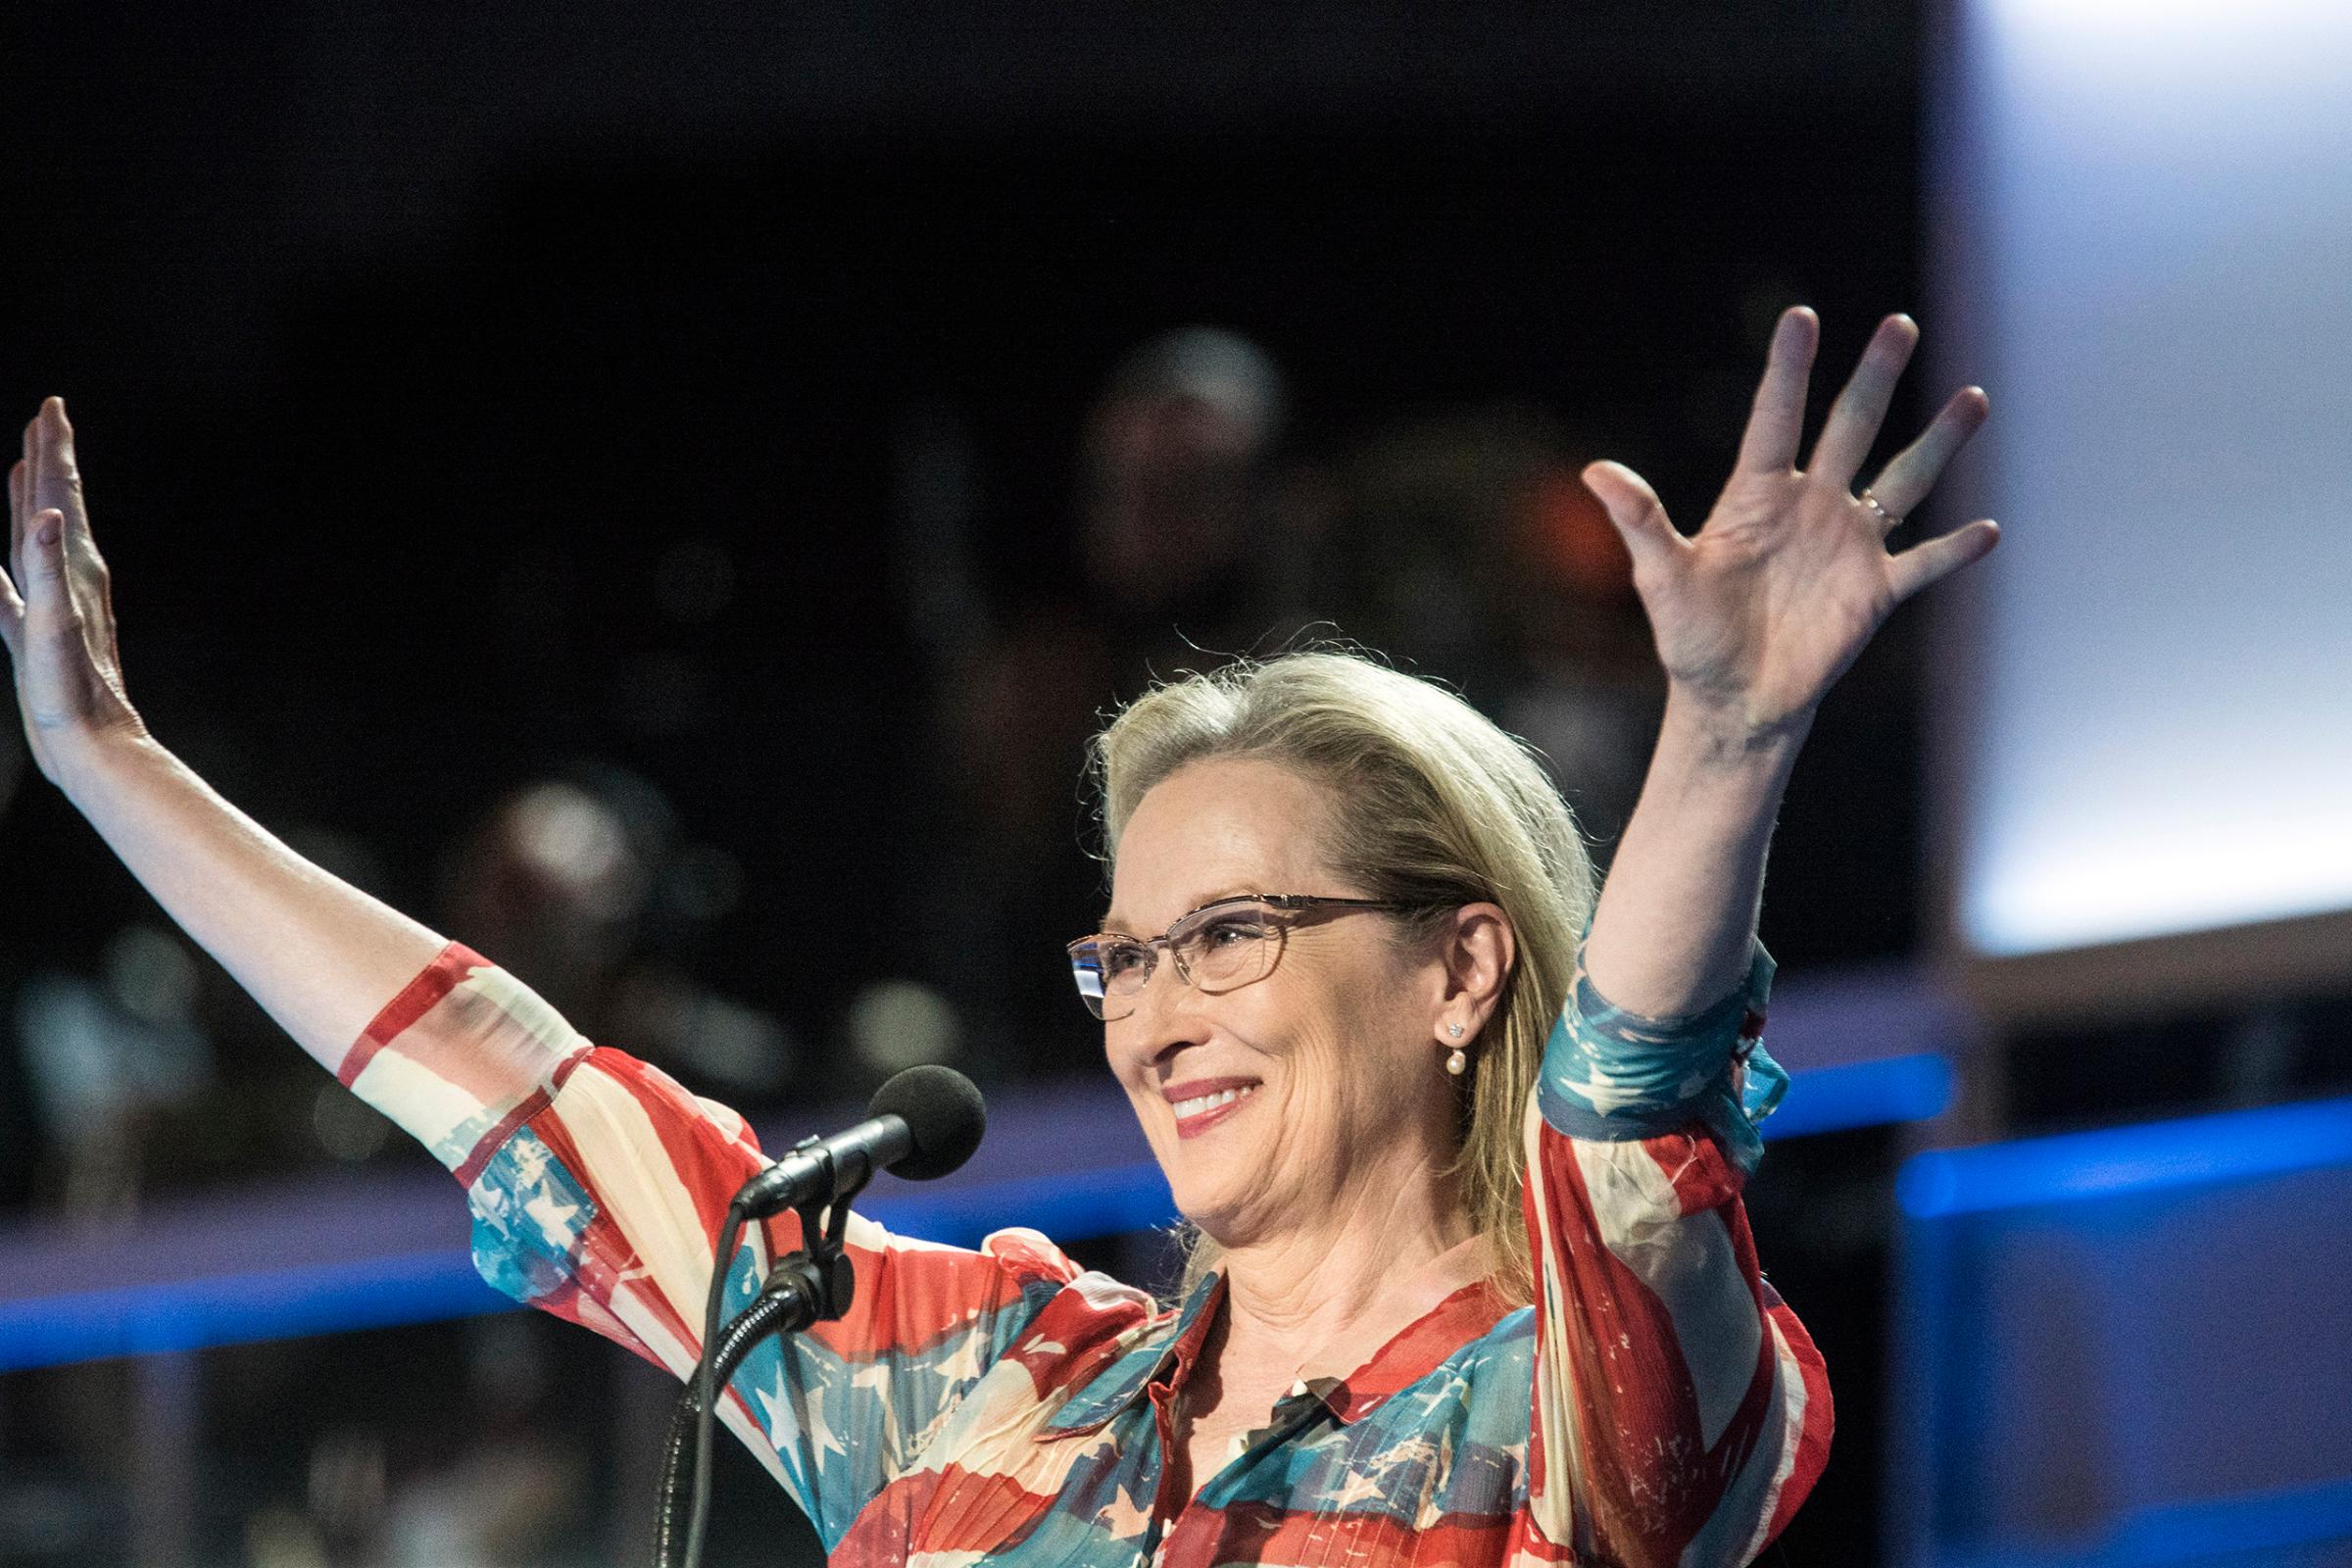 Actress Meryl Streep delivers remarks on the second day of the Democratic National Convention at the Wells Fargo Center in Philadelphia on July 26, 2016.